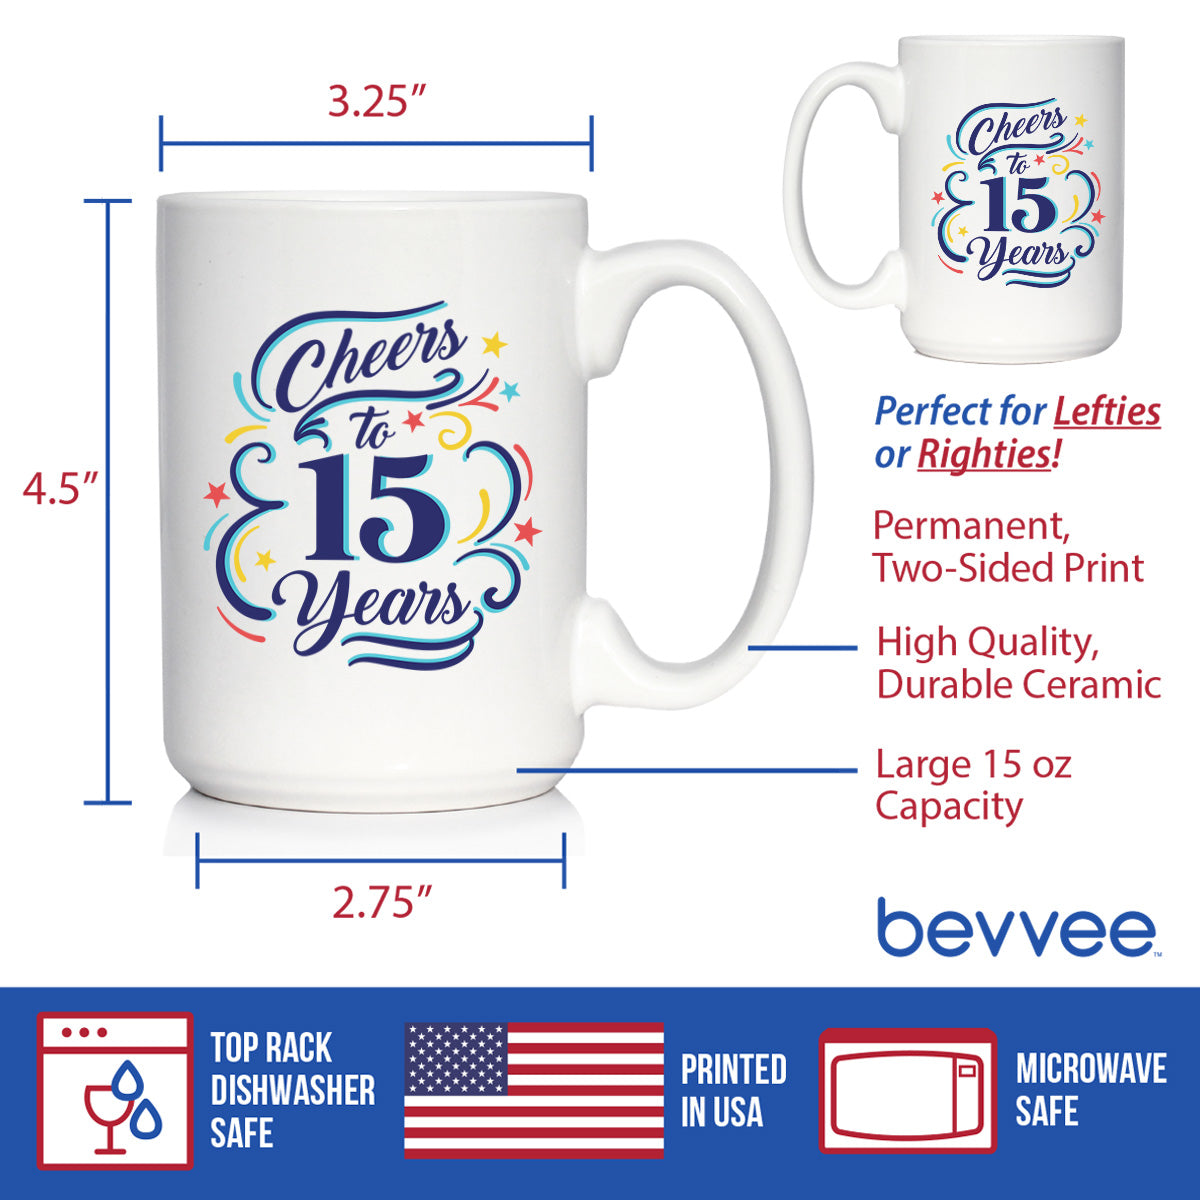 Cheers to 15 Years - Coffee Mug Gifts for Women &amp; Men - 15th Anniversary Party Decor